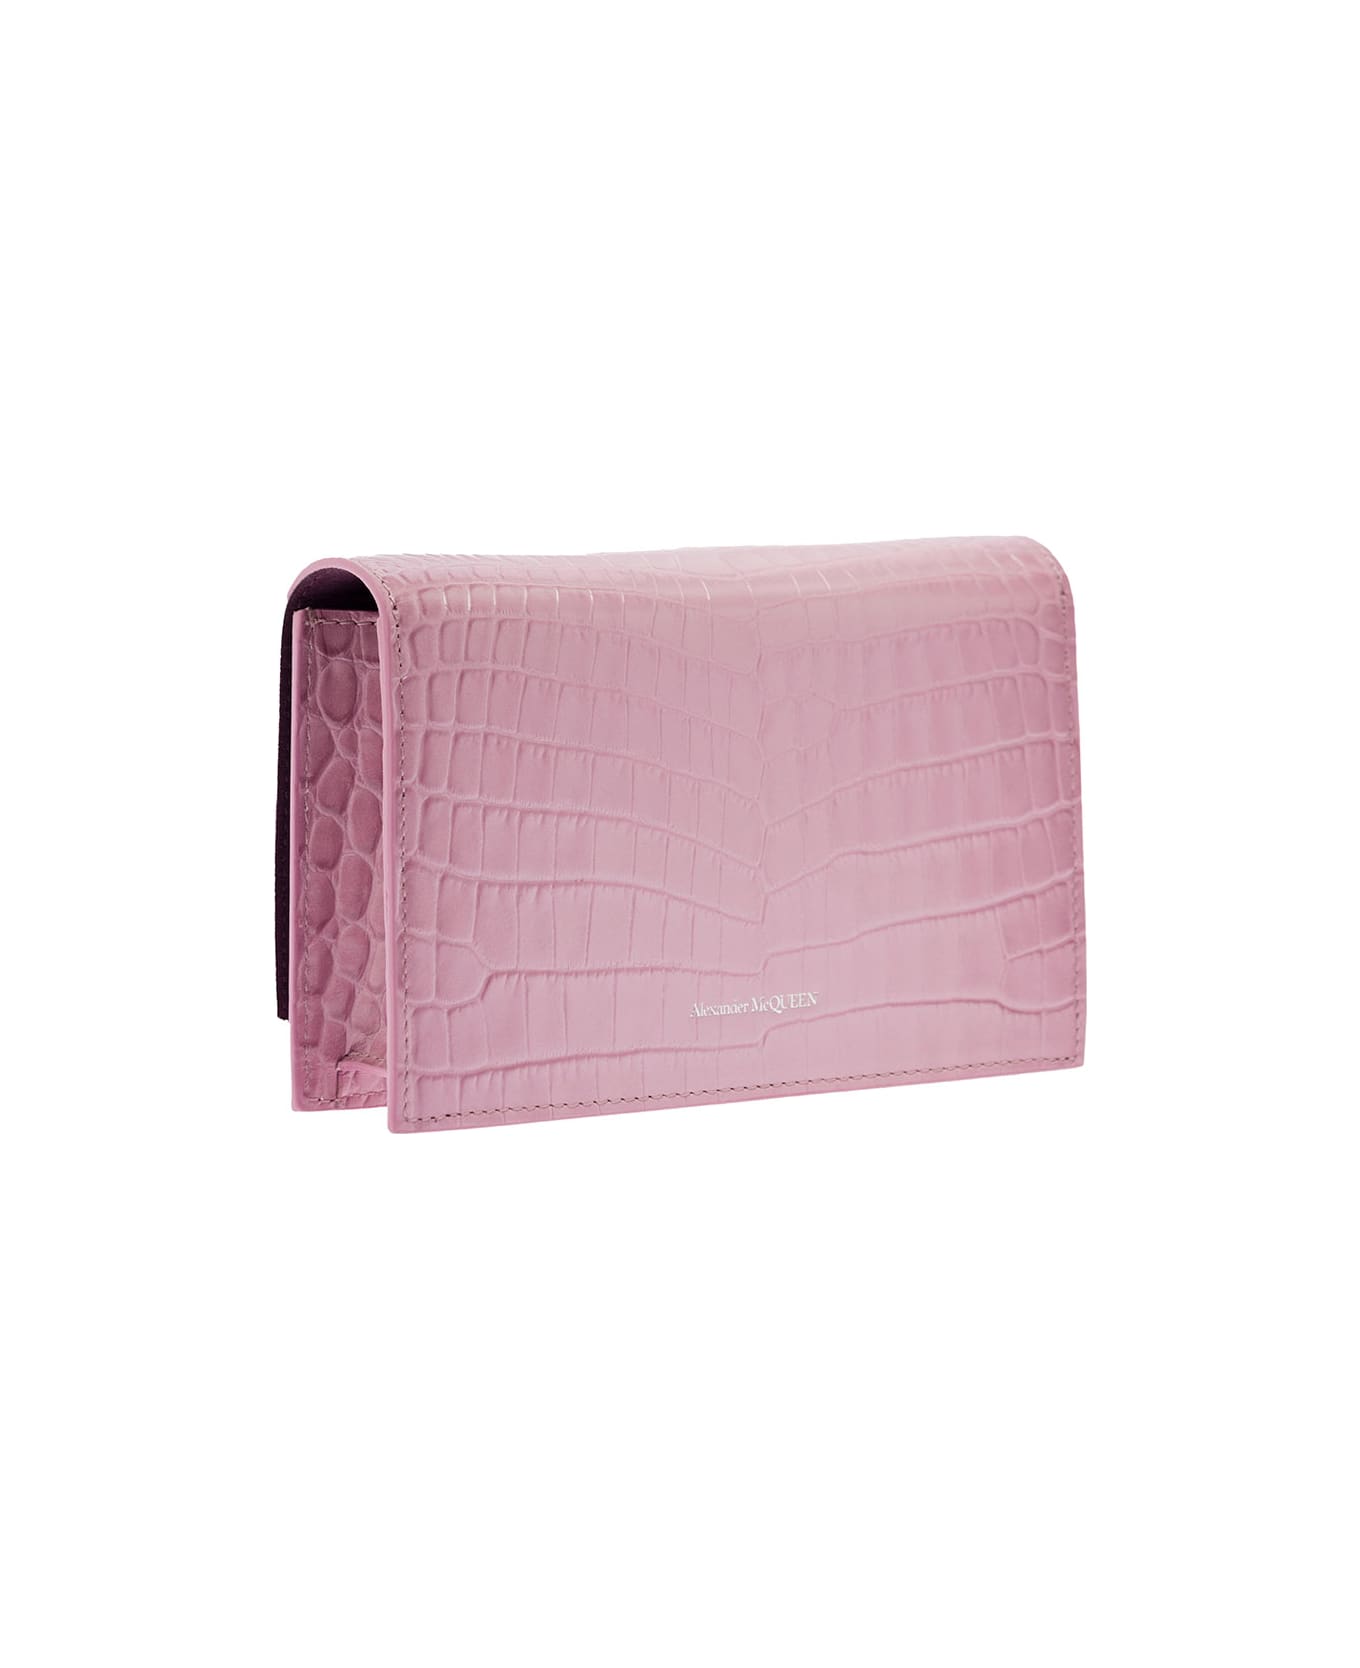 Alexander McQueen Pink Mini Bag With Crocodile Embossed Effect And Skull Detail In Leather Woman - Pink